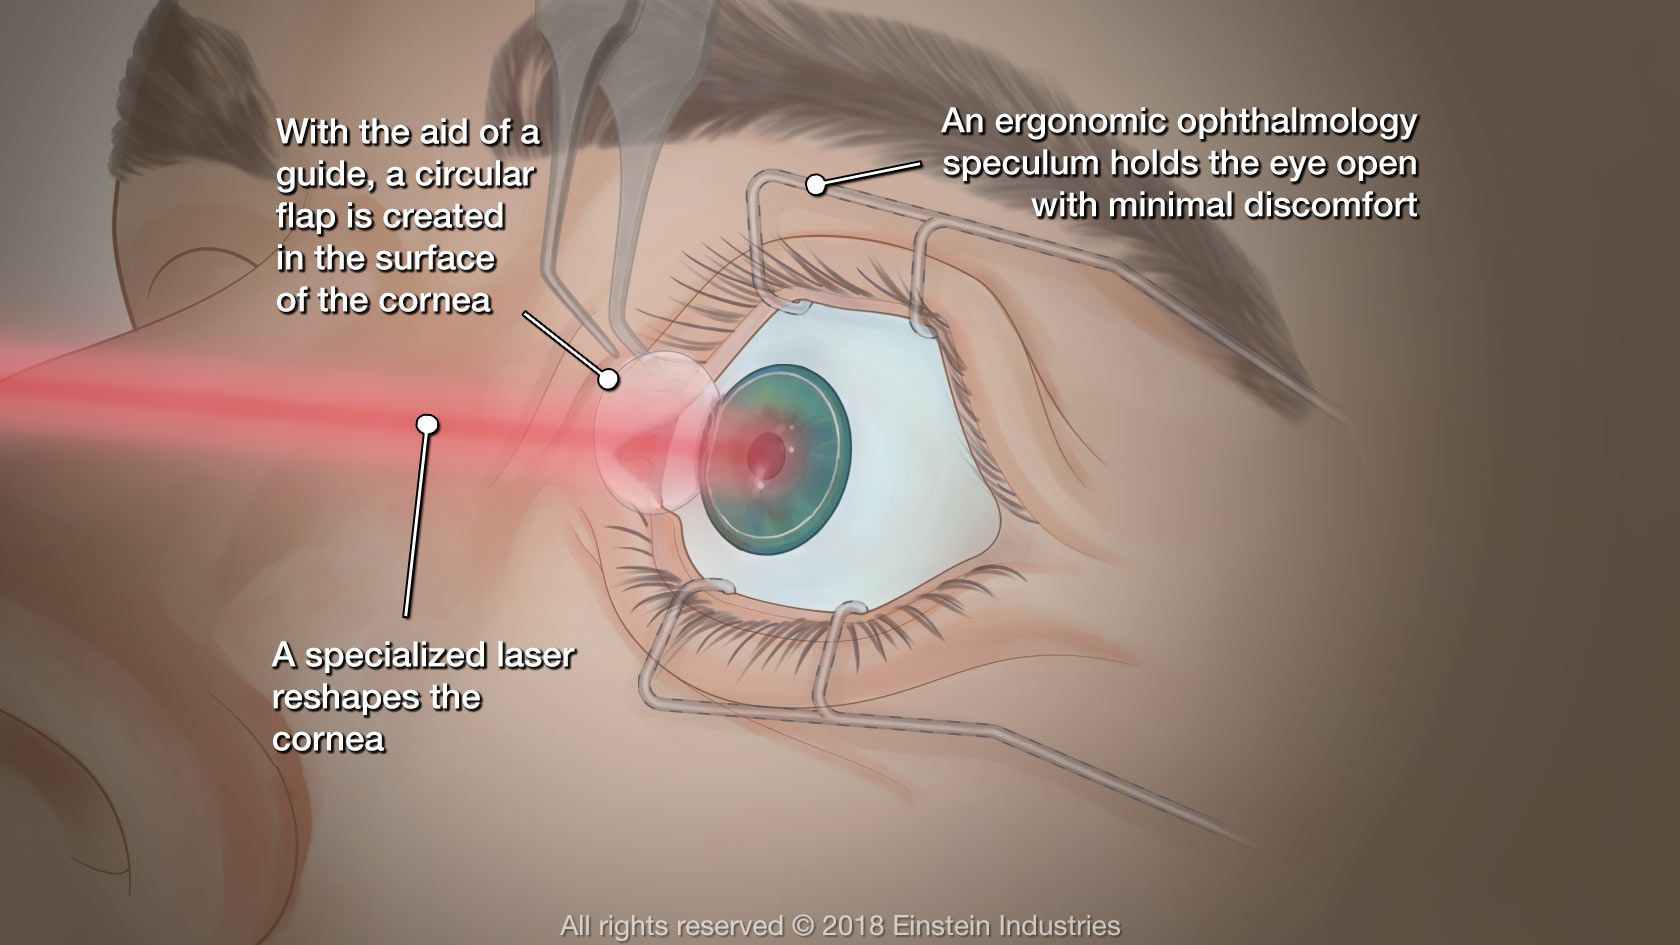 How Does Glaucoma Surgery Work?